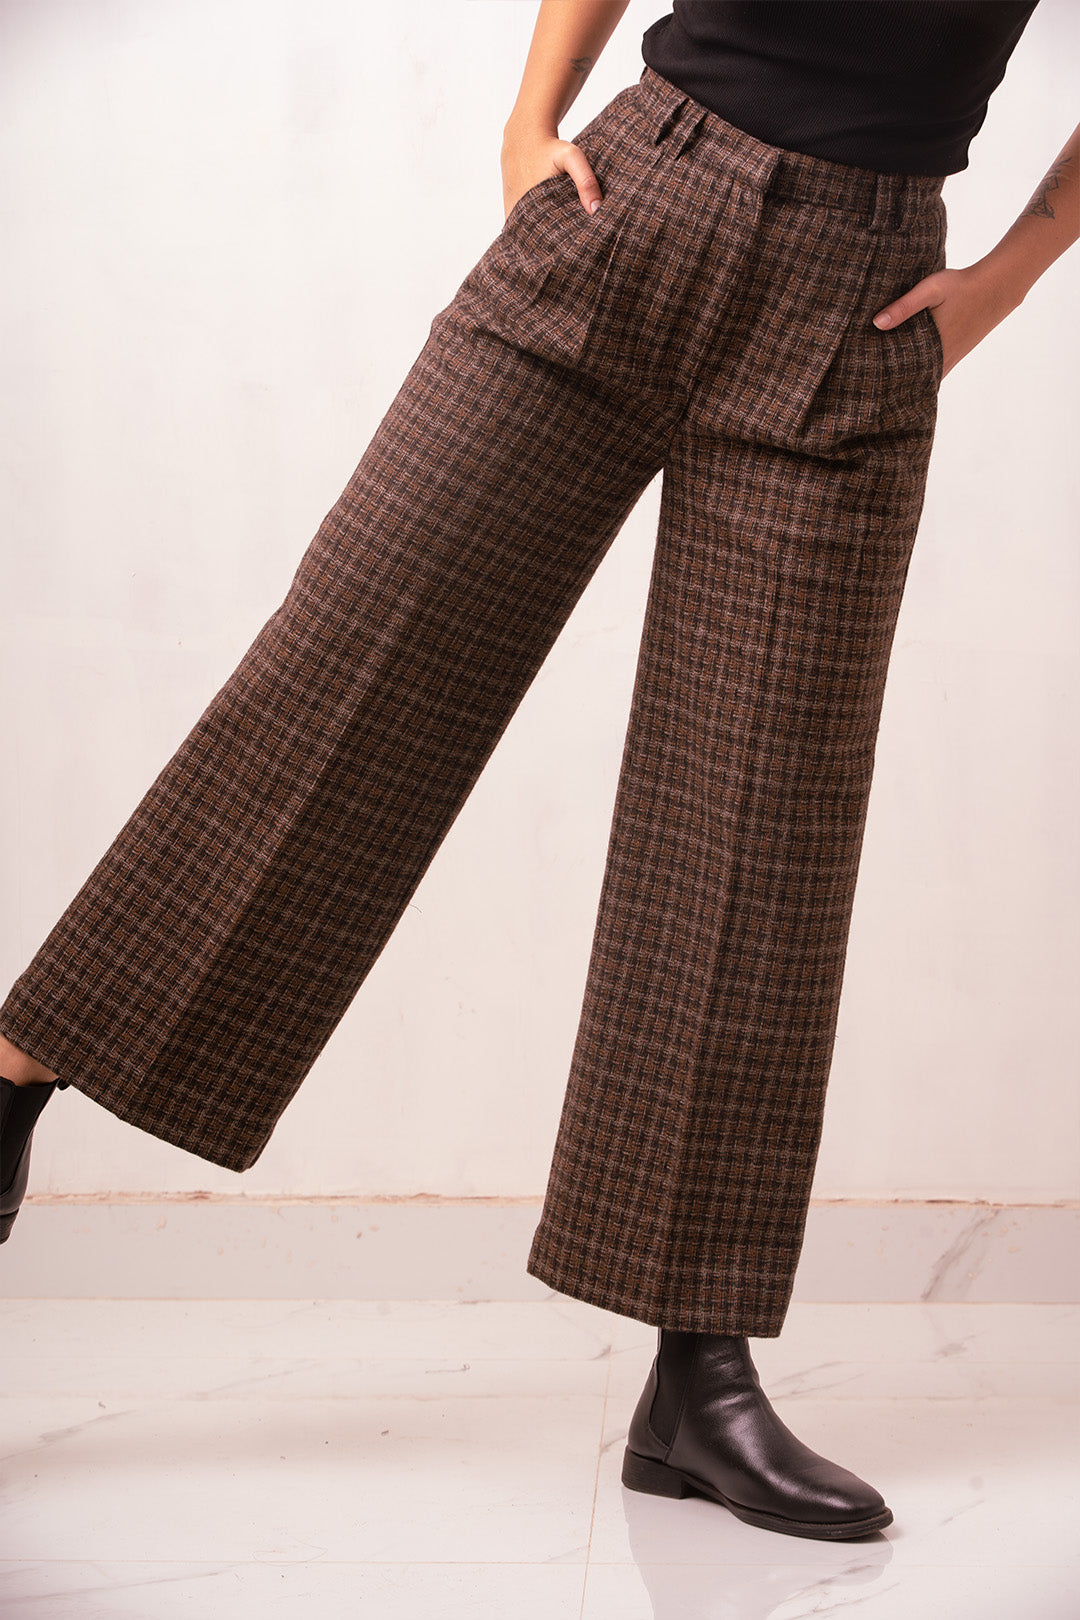 Top more than 130 wool trousers womens best